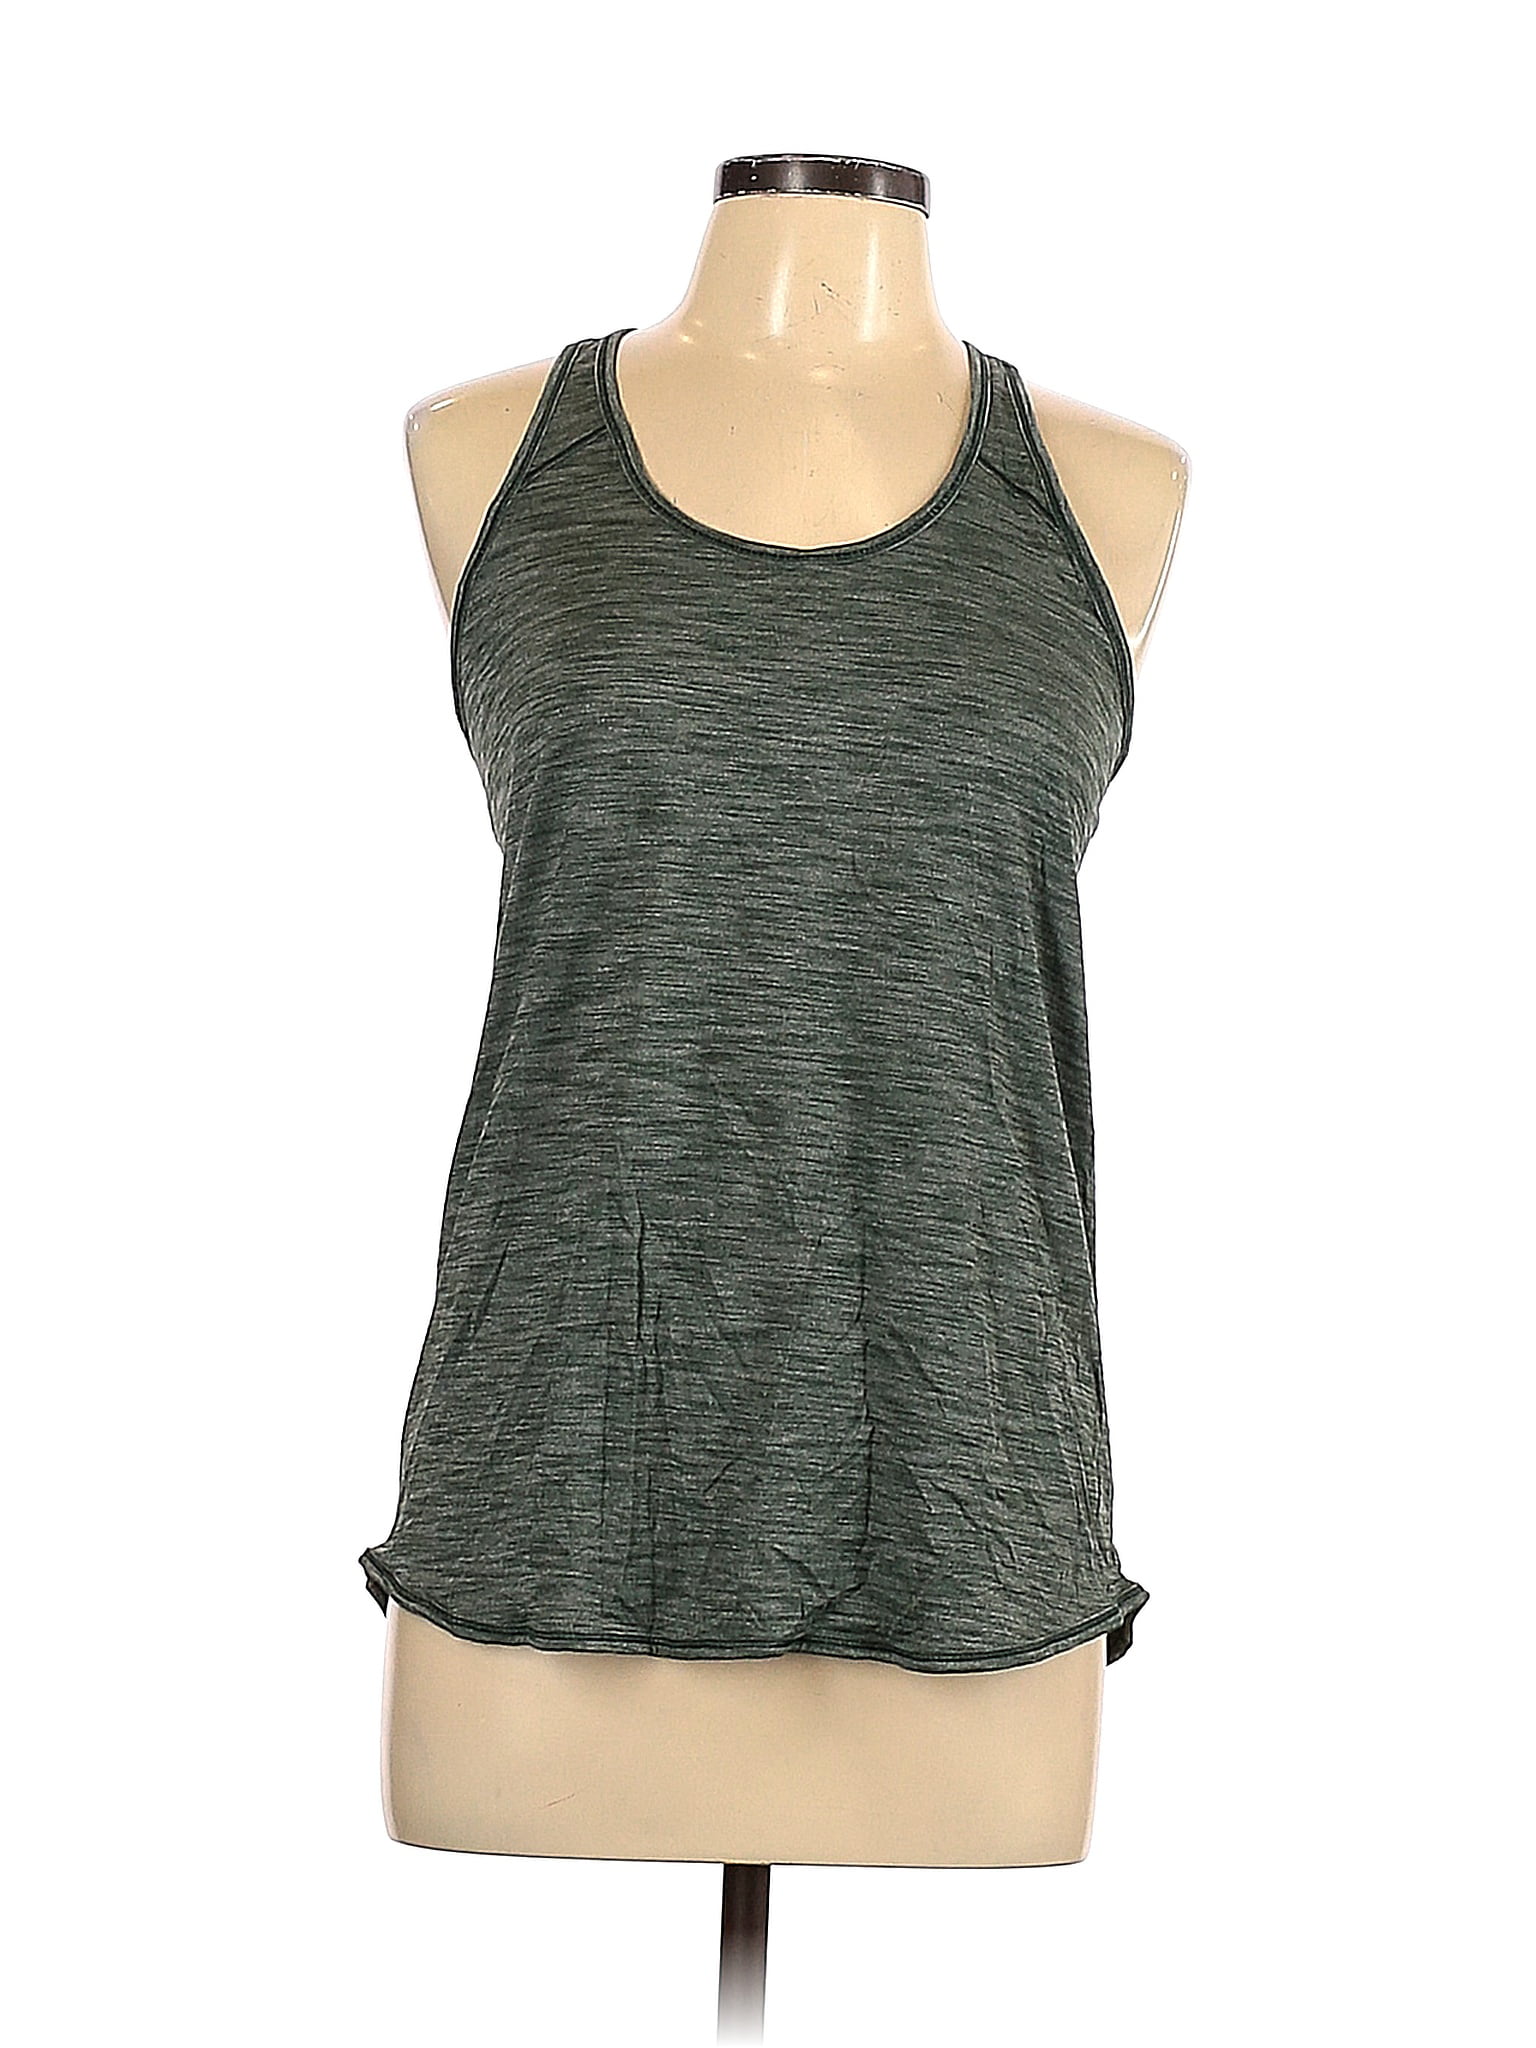 Pre-Owned Lululemon Athletica Womens Size 10 Track Palestine